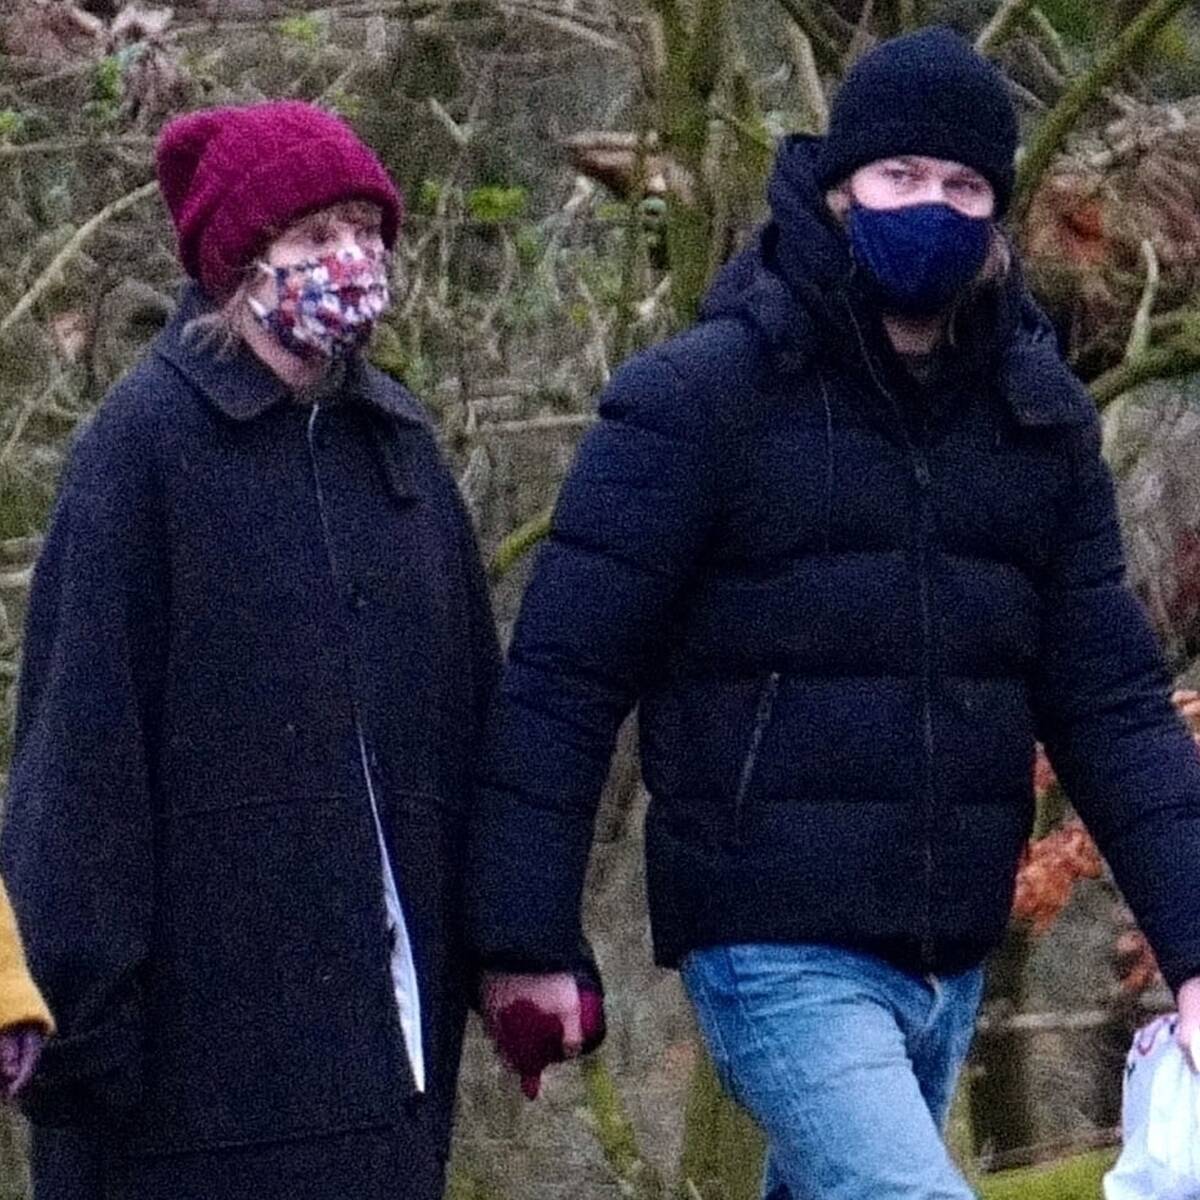 Taylor Swift and Joe Alwyn Hold Hands in Rare Outing With a Special Family Member